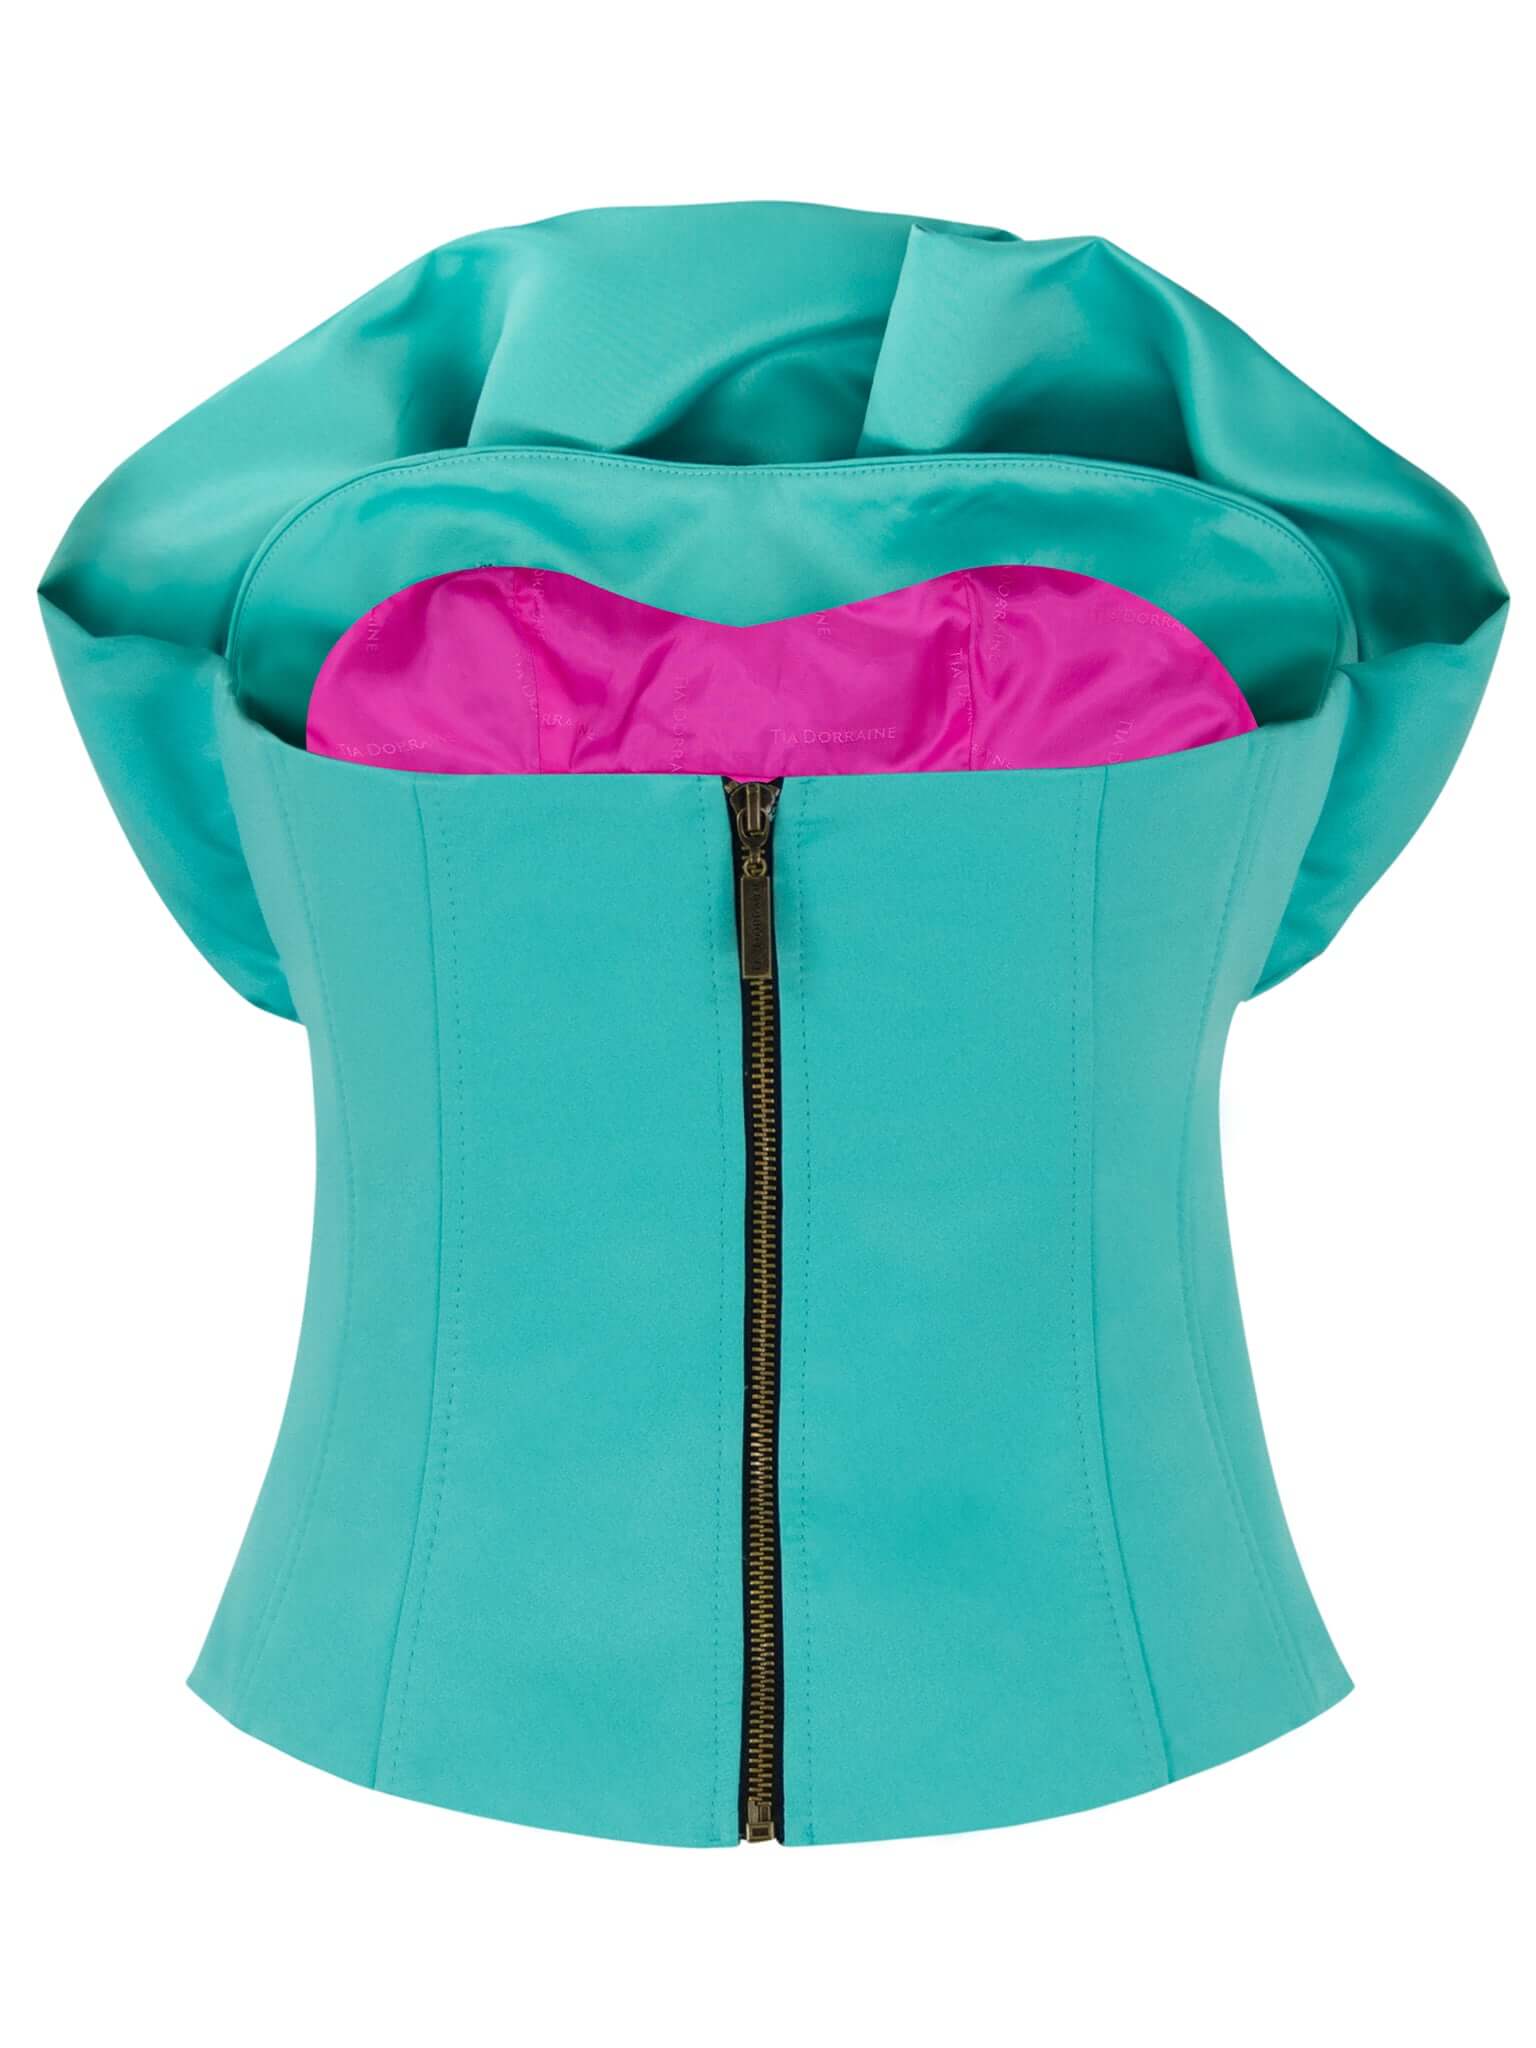 Ray of Sunshine Corset Bustier Top - Biscay Green Tia Dorraine